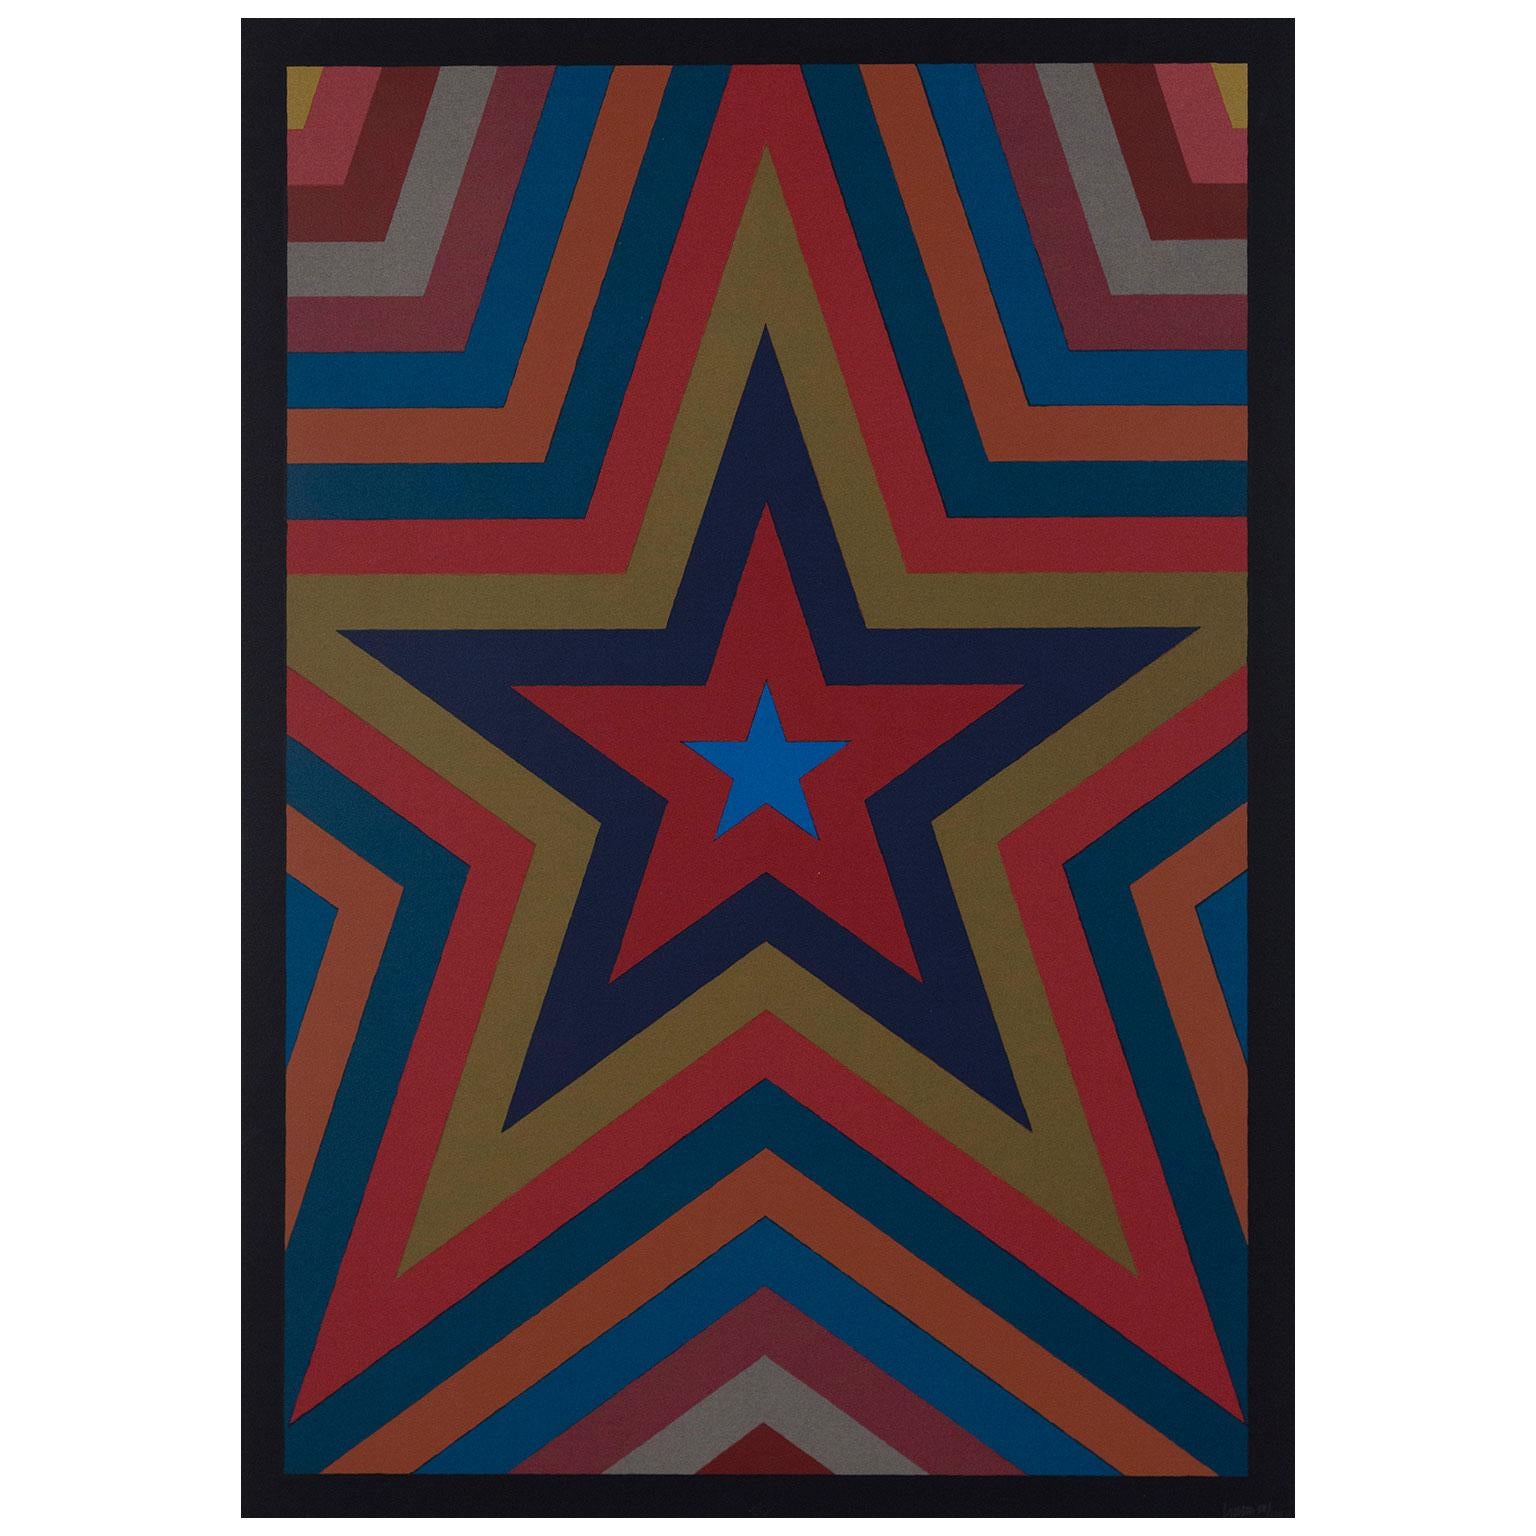 Sol LeWitt Abstract Print - Five Pointed Star with Color Bands